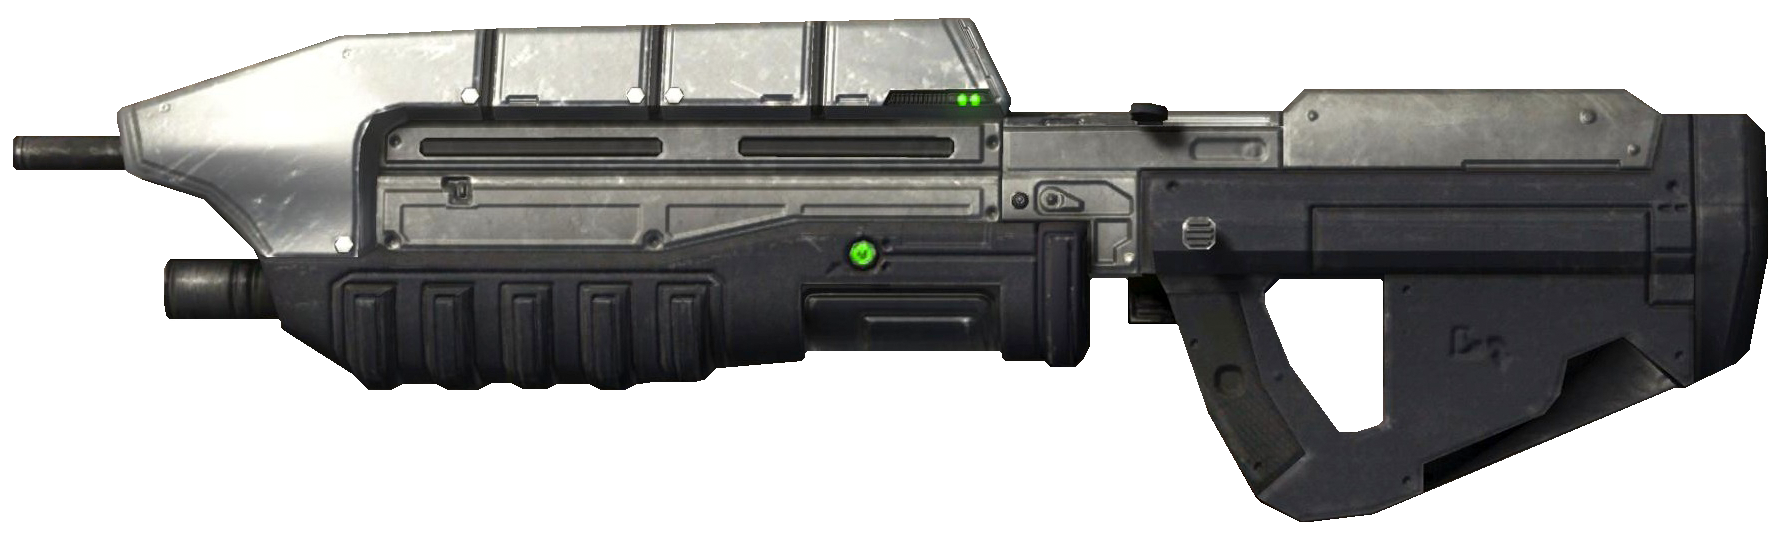 Halo 3 Gun Porn - Halo Assault Rifle - How does it stack up as a weapon? | SpaceBattles Forums